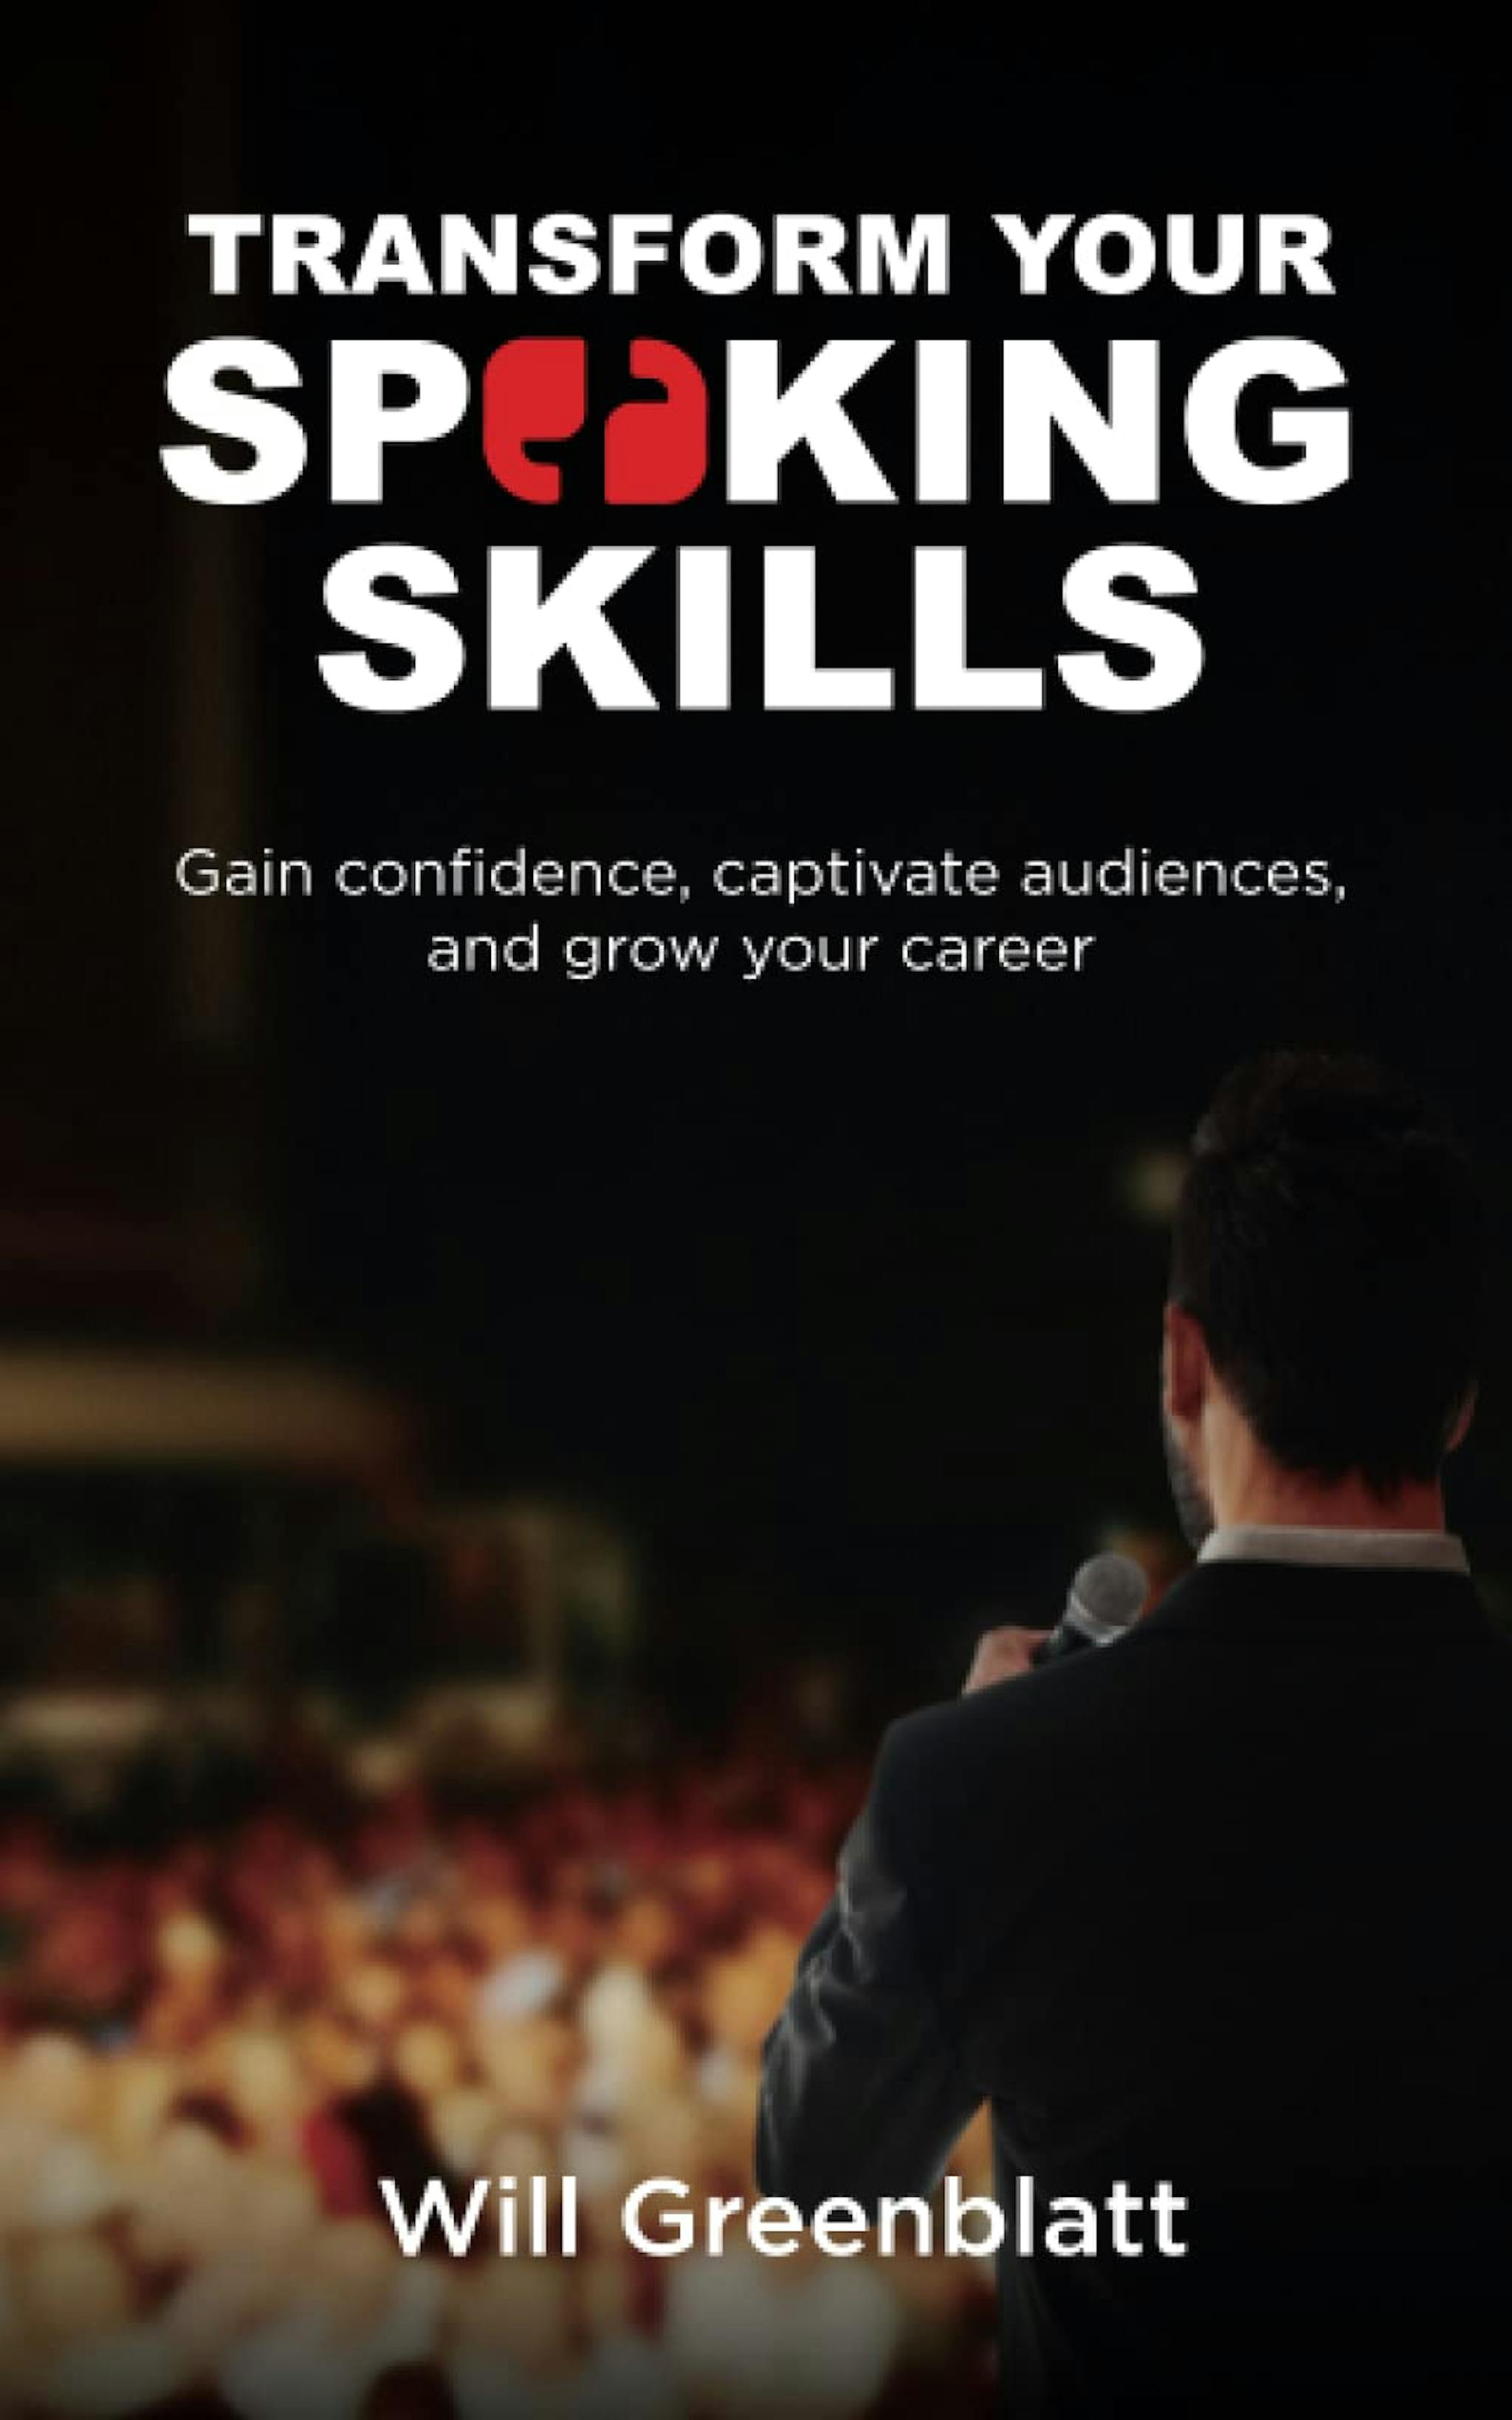 The cover of the book Transform Your Speaking Skills, which shows a dark haired man with light skin speaking to a crowd of people.